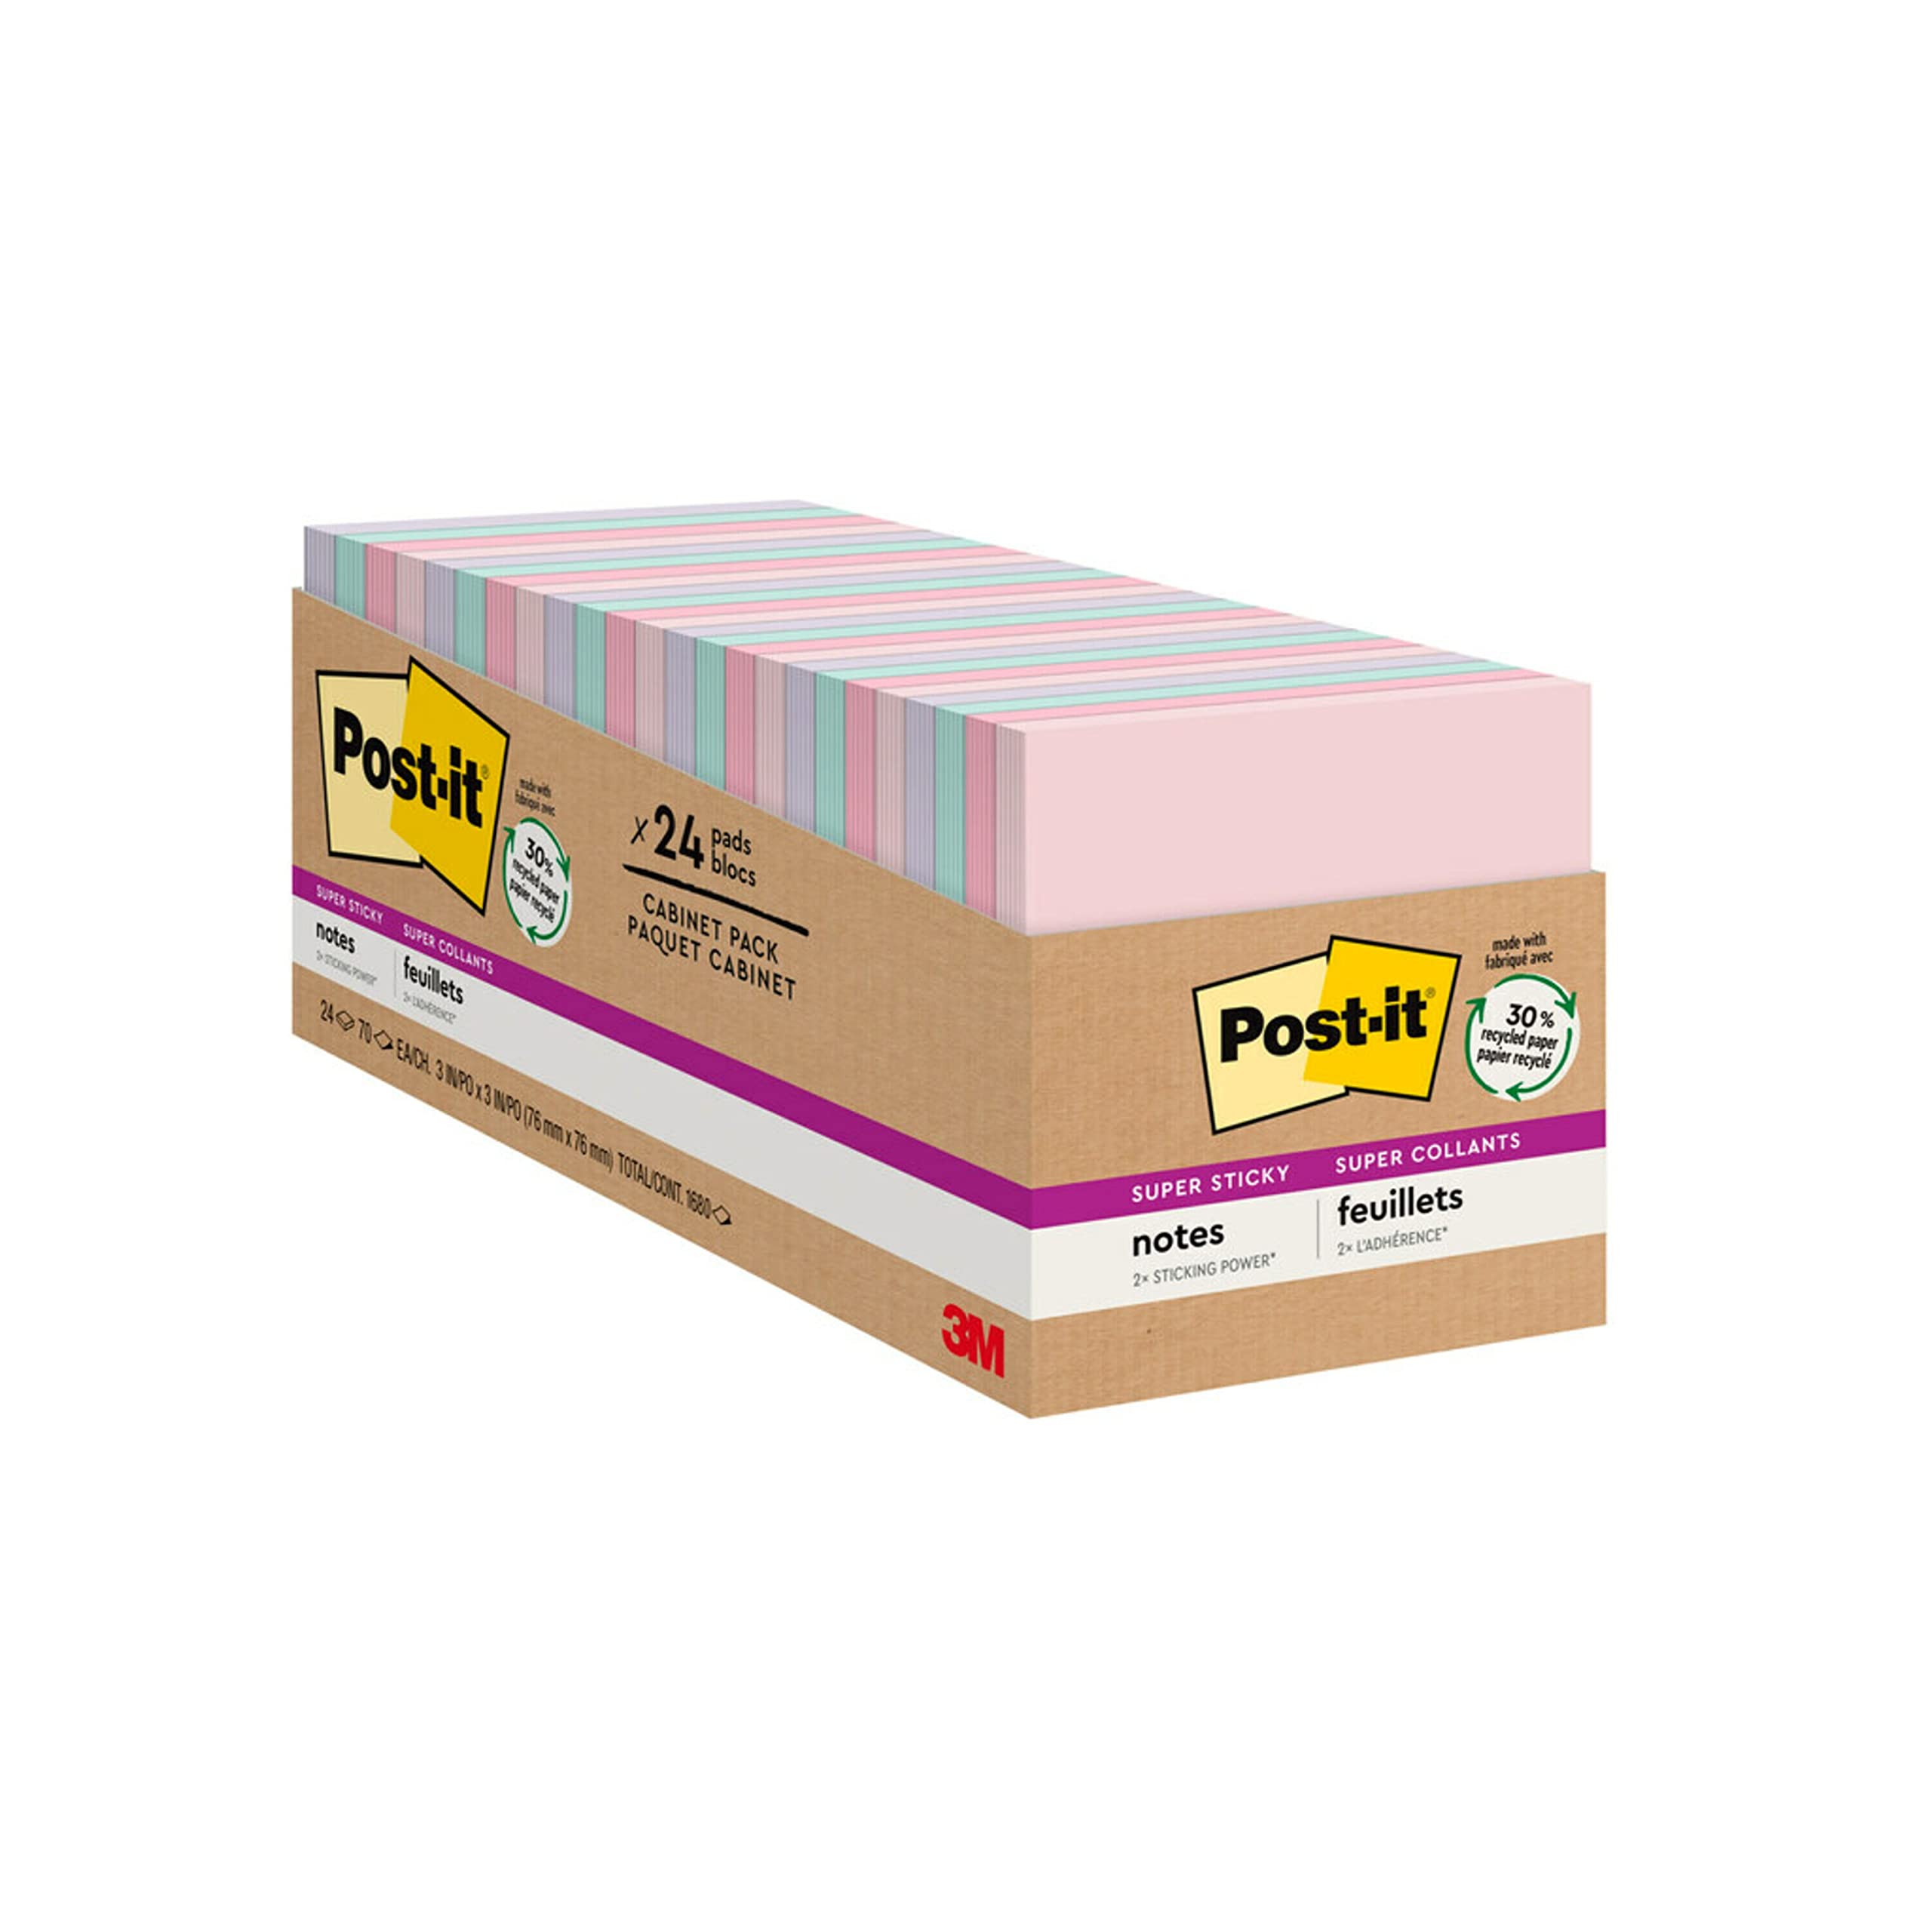 Book Cover Post-it Super Sticky Recycled Notes, 3x3 in, 24 Pads, 2x the Sticking Power, Wanderlust Collection, Pastel Colors, 30% Recycled Paper (654-24NH-CP)